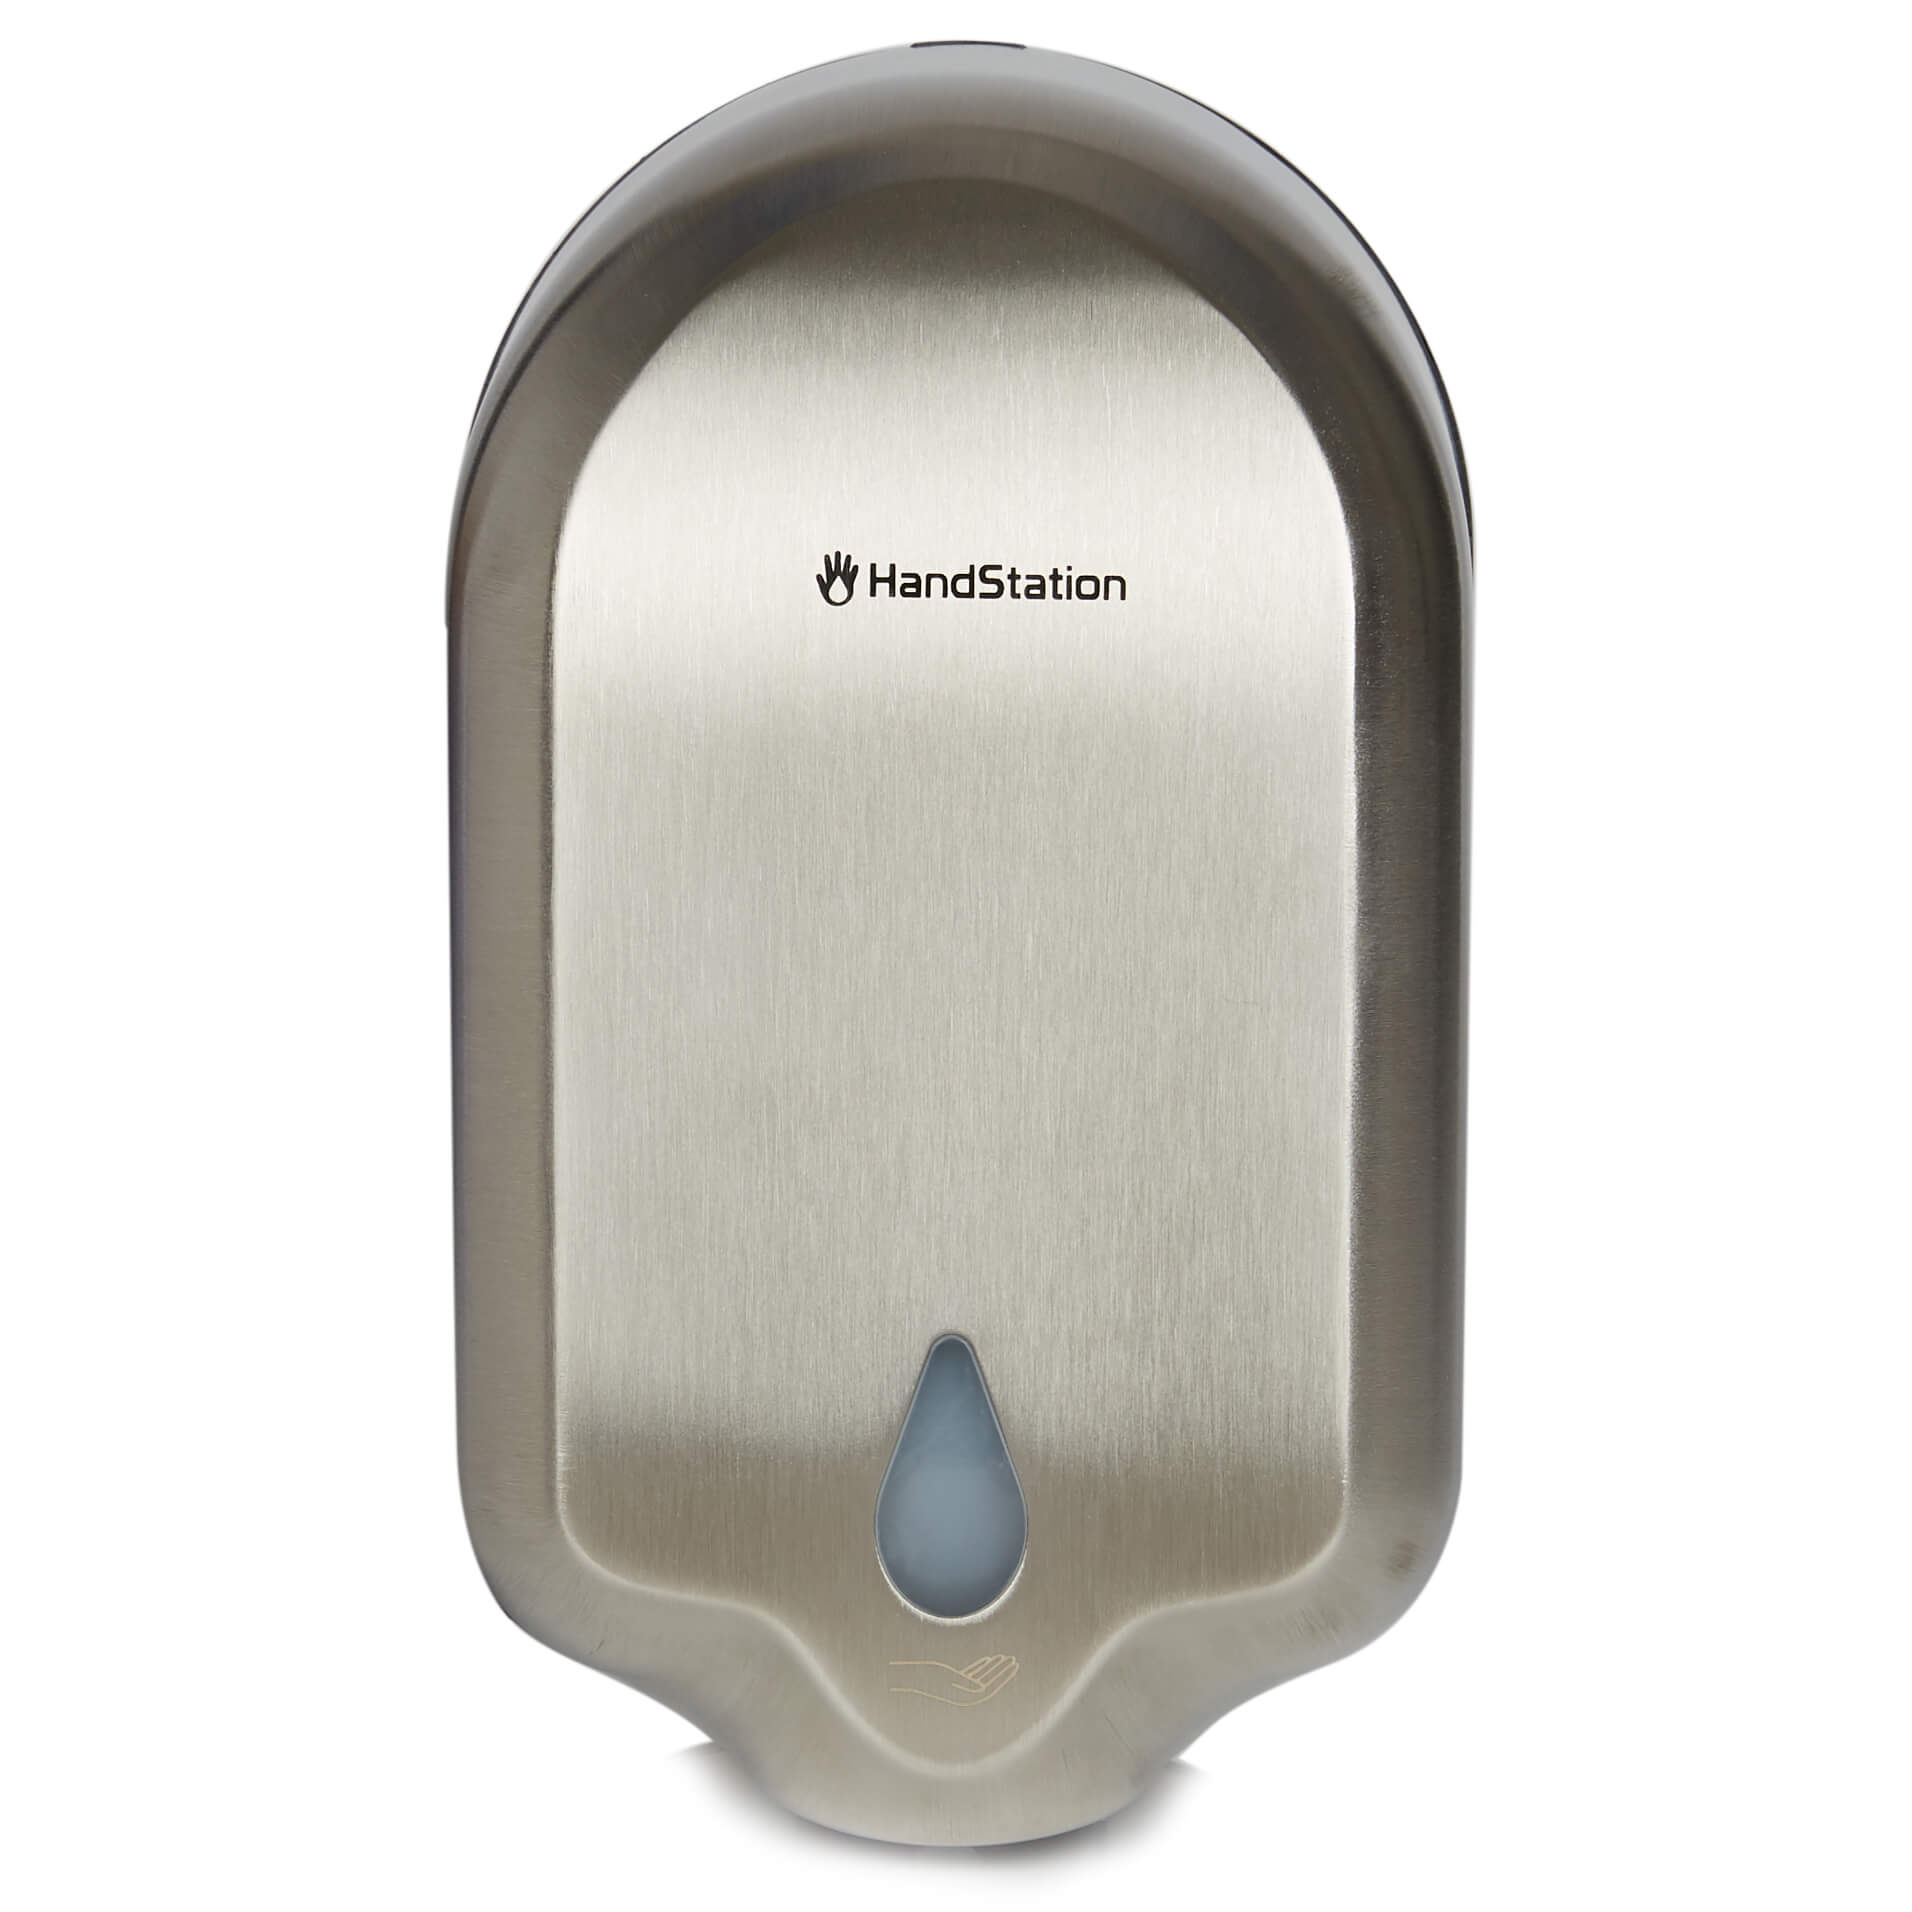 HandStation Eco Stainless Wall Mounted Automatic Touch Free Hand Sanitiser System – Foam Dispenser